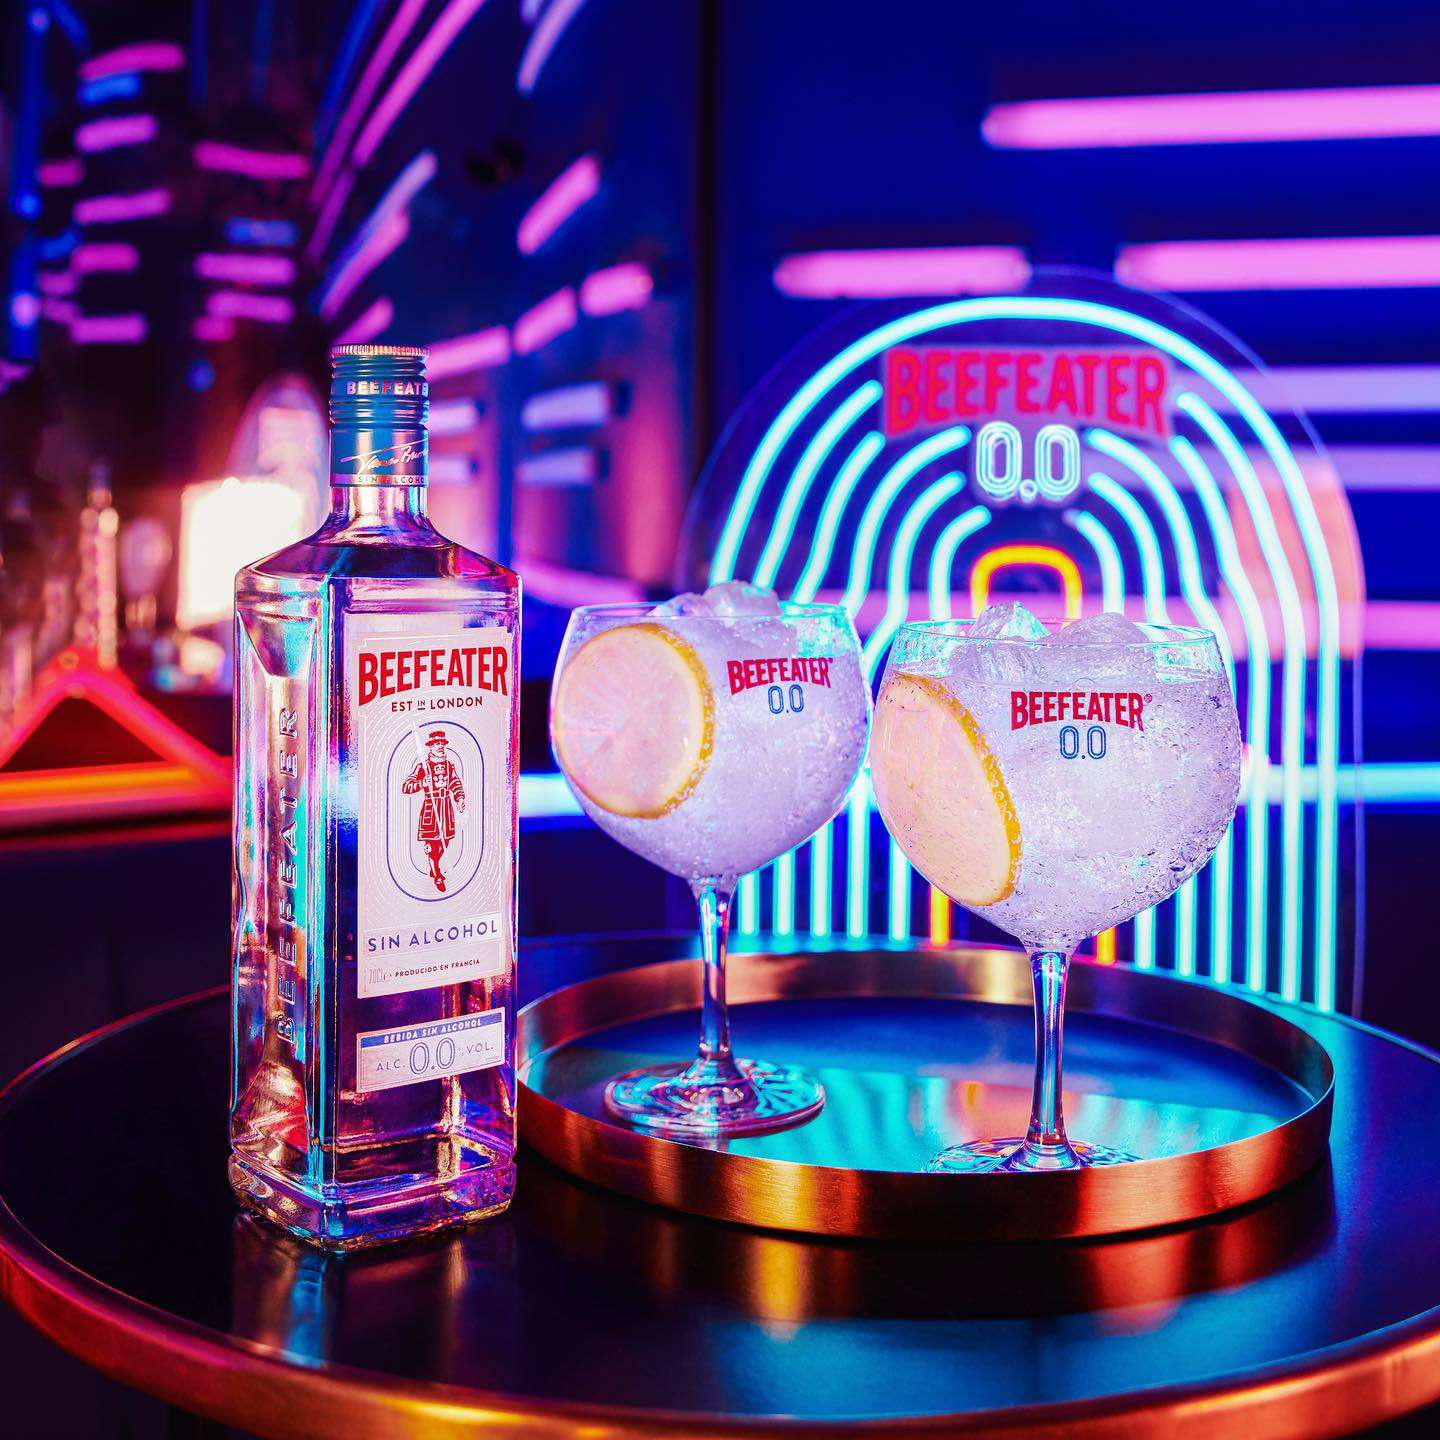 Pernod Ricard Debuts Zero-ABV Beefeater 0.0% Gin: 'An Elevated Option' – Ethos